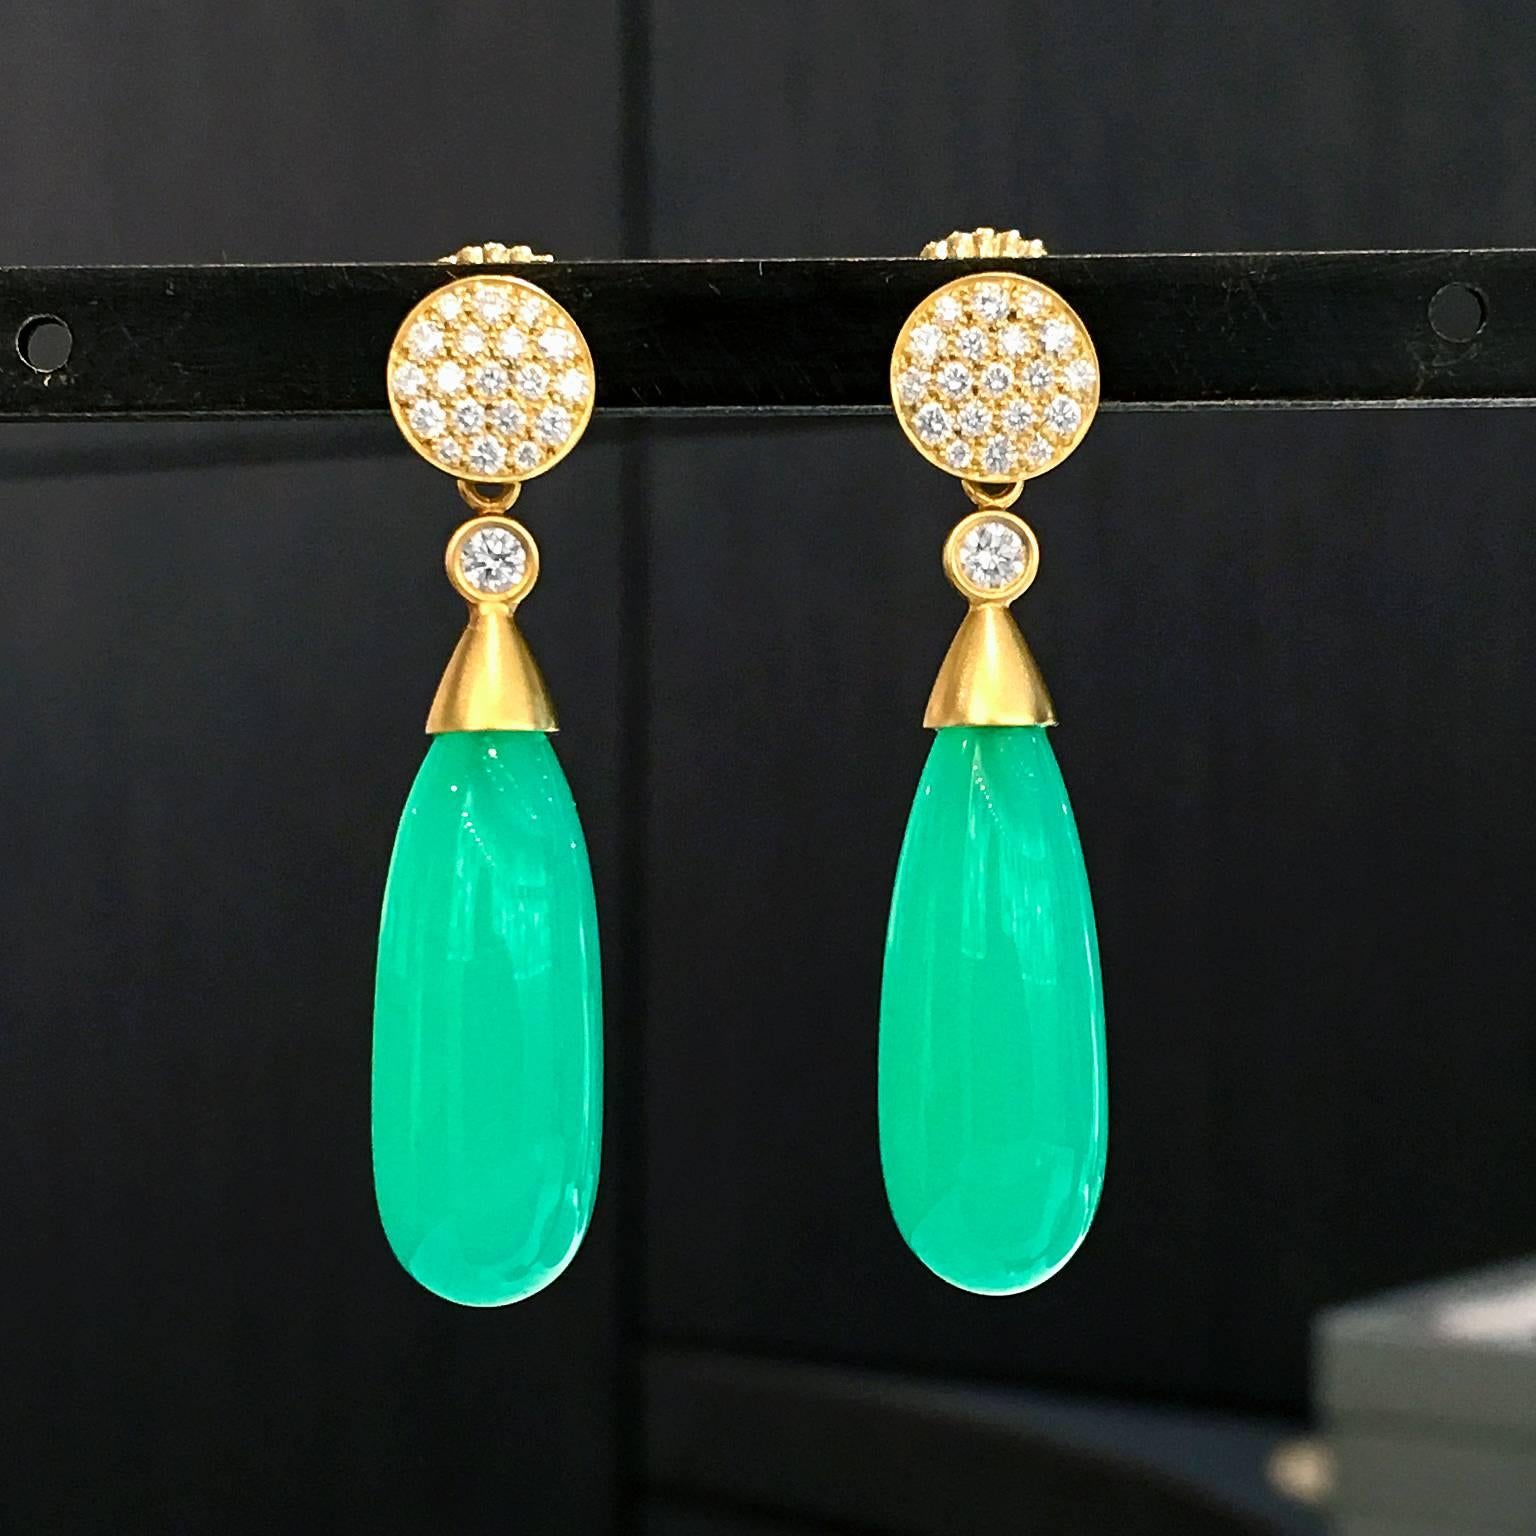 One-of-a-Kind Drop Earrings handcrafted by jewelry artist Susan Sadler showcasing a pair of matched bluish-green smooth chrysoprase drops set in matte and satin-finished 18.5k yellow gold with two bezel-set round brilliant-cut F/vs1 white diamonds